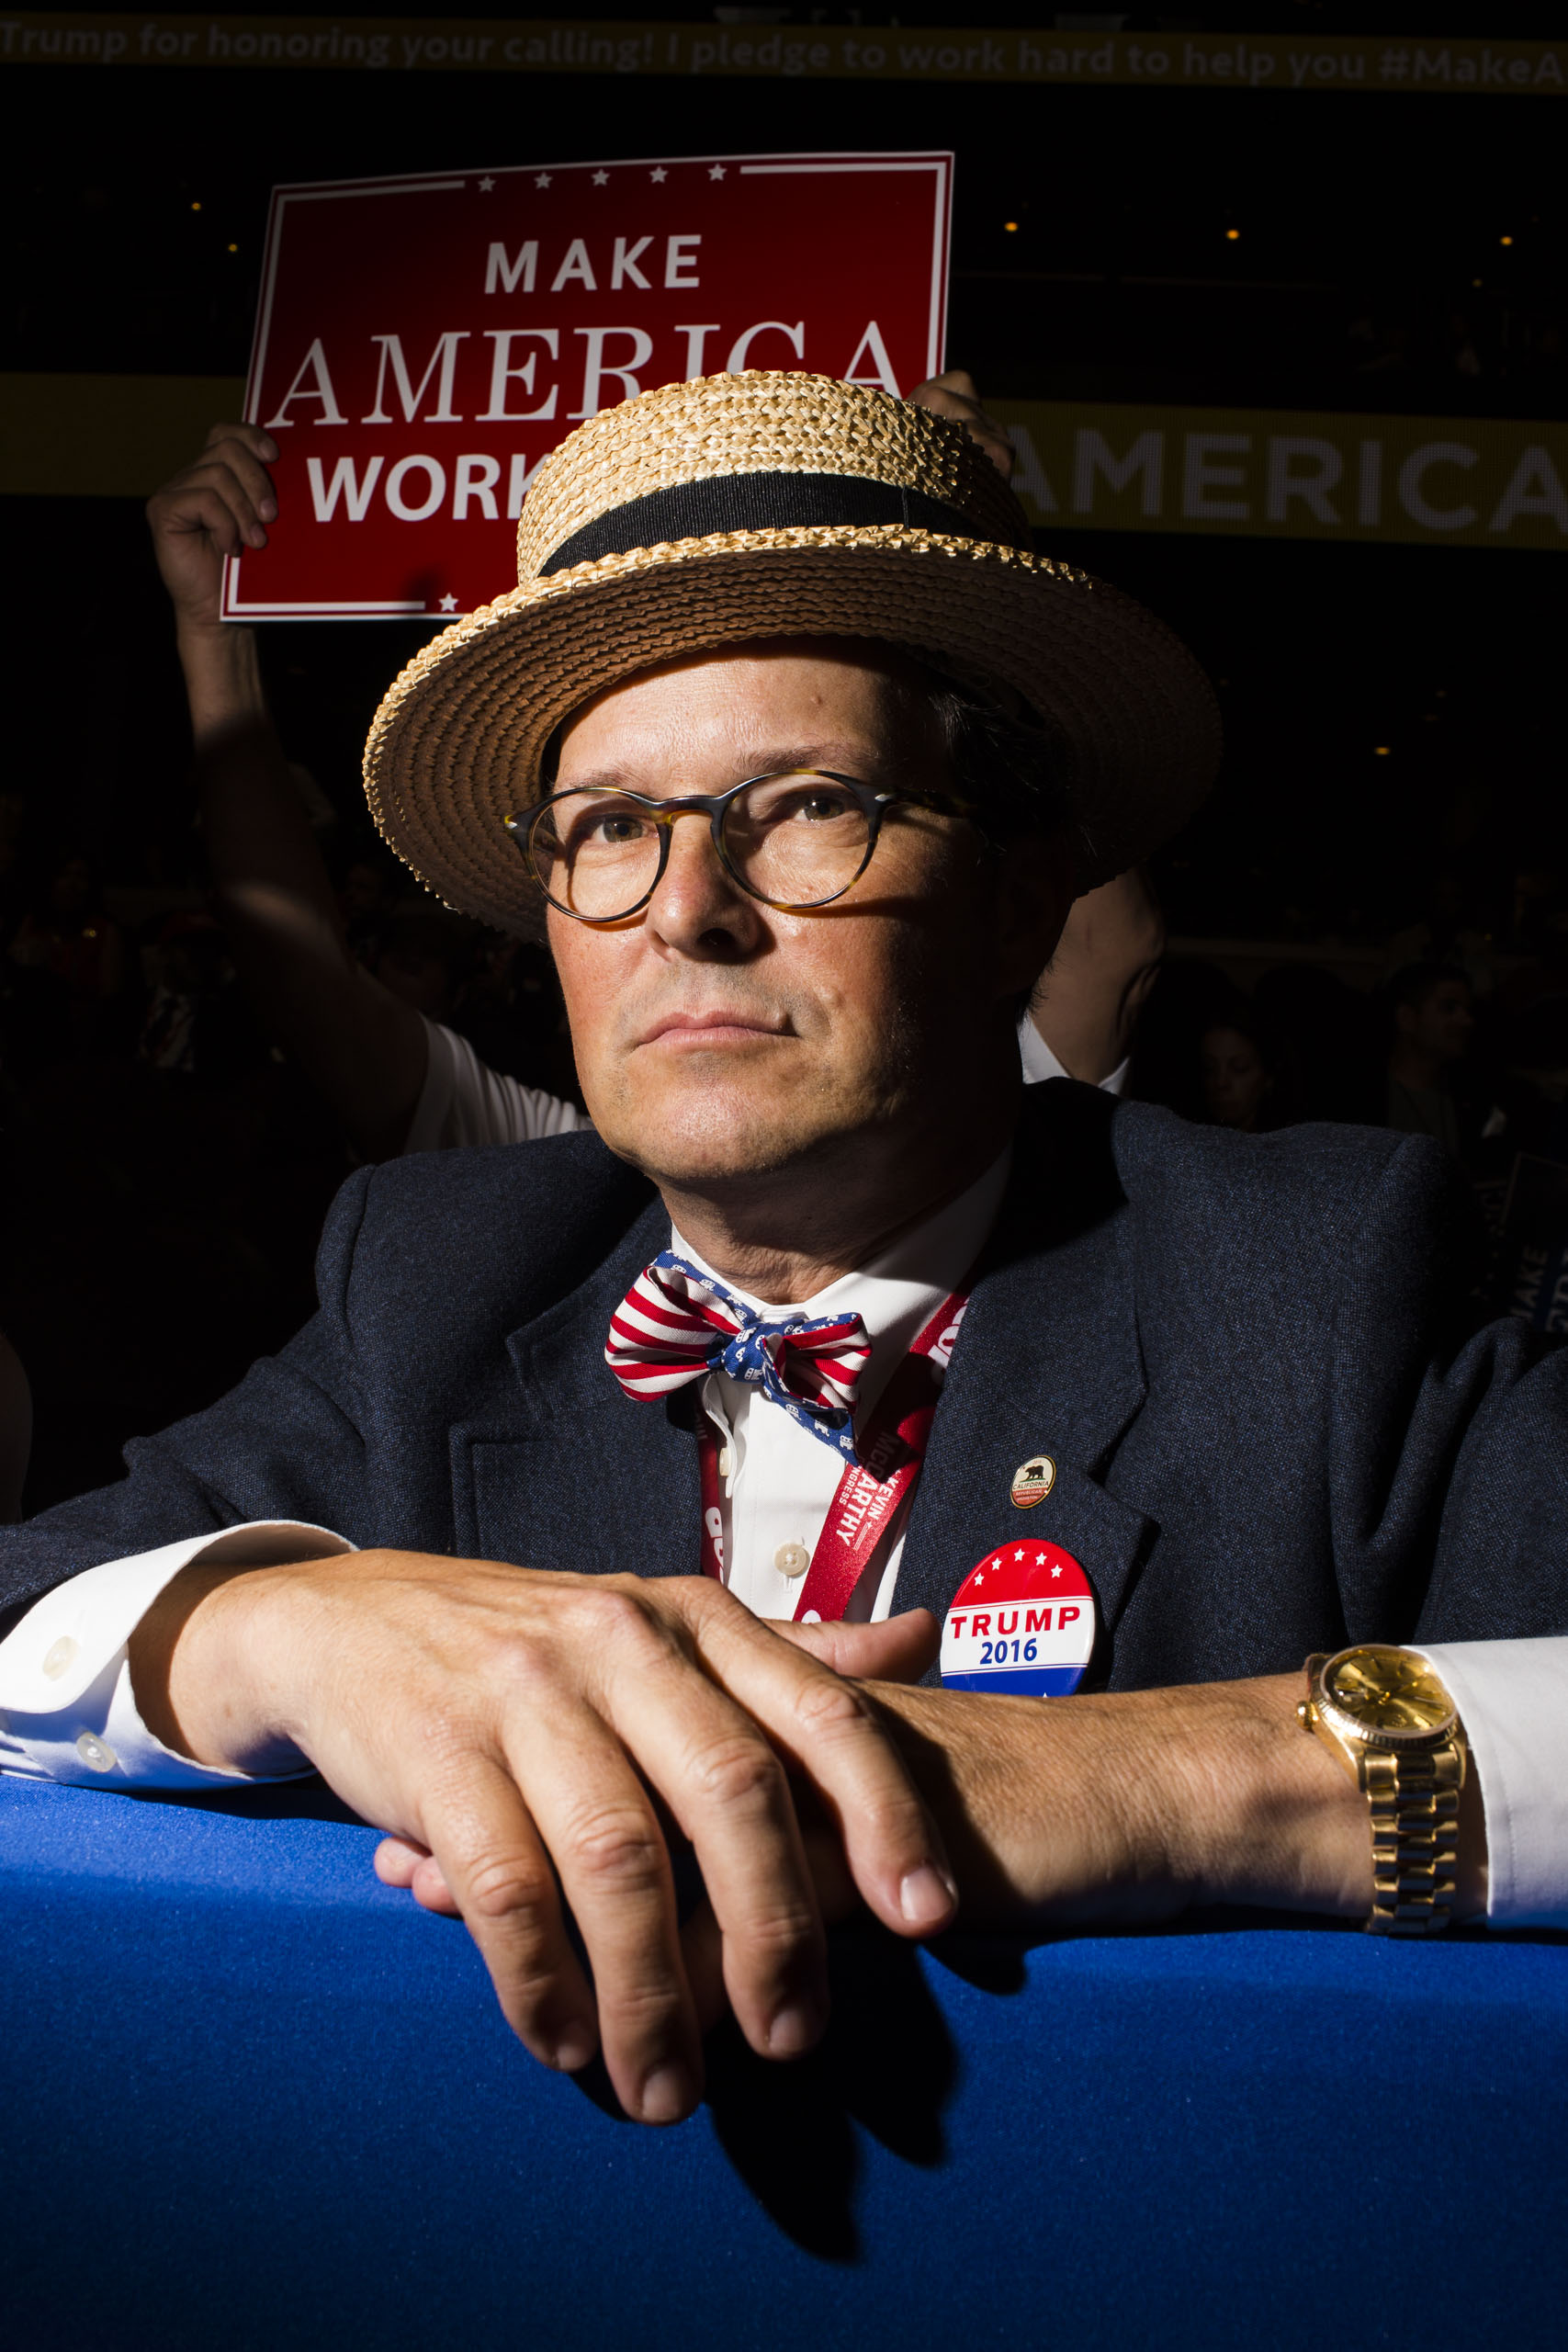 A man attends the 2016 Republican National Convention in Cleveland on Tuesday, July 19, 2016.